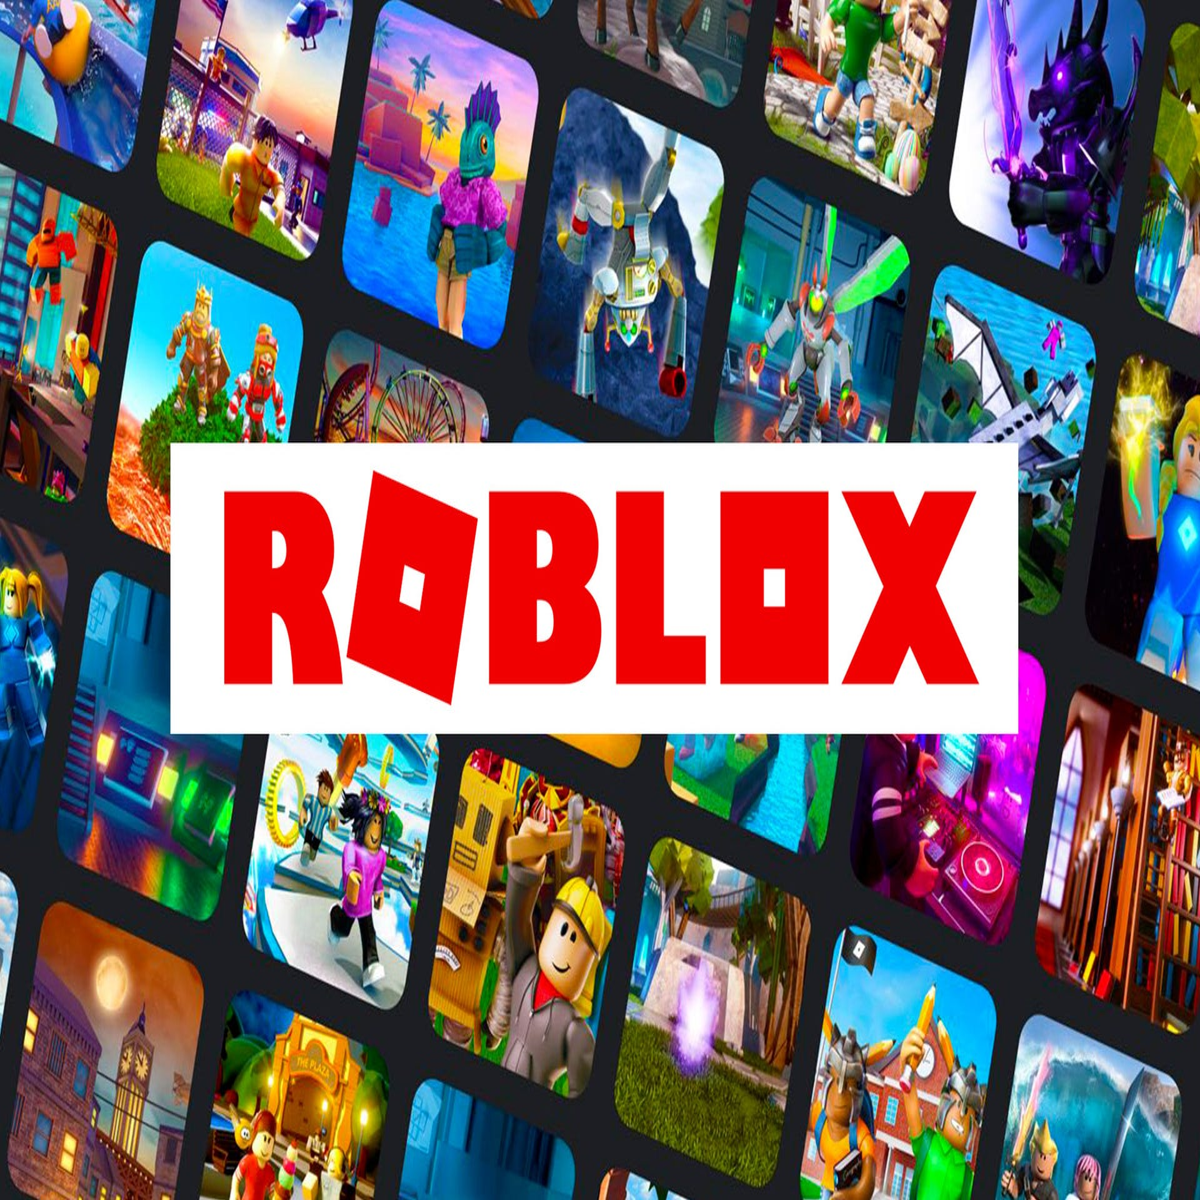 Cartoon Network Game On! is live on Roblox